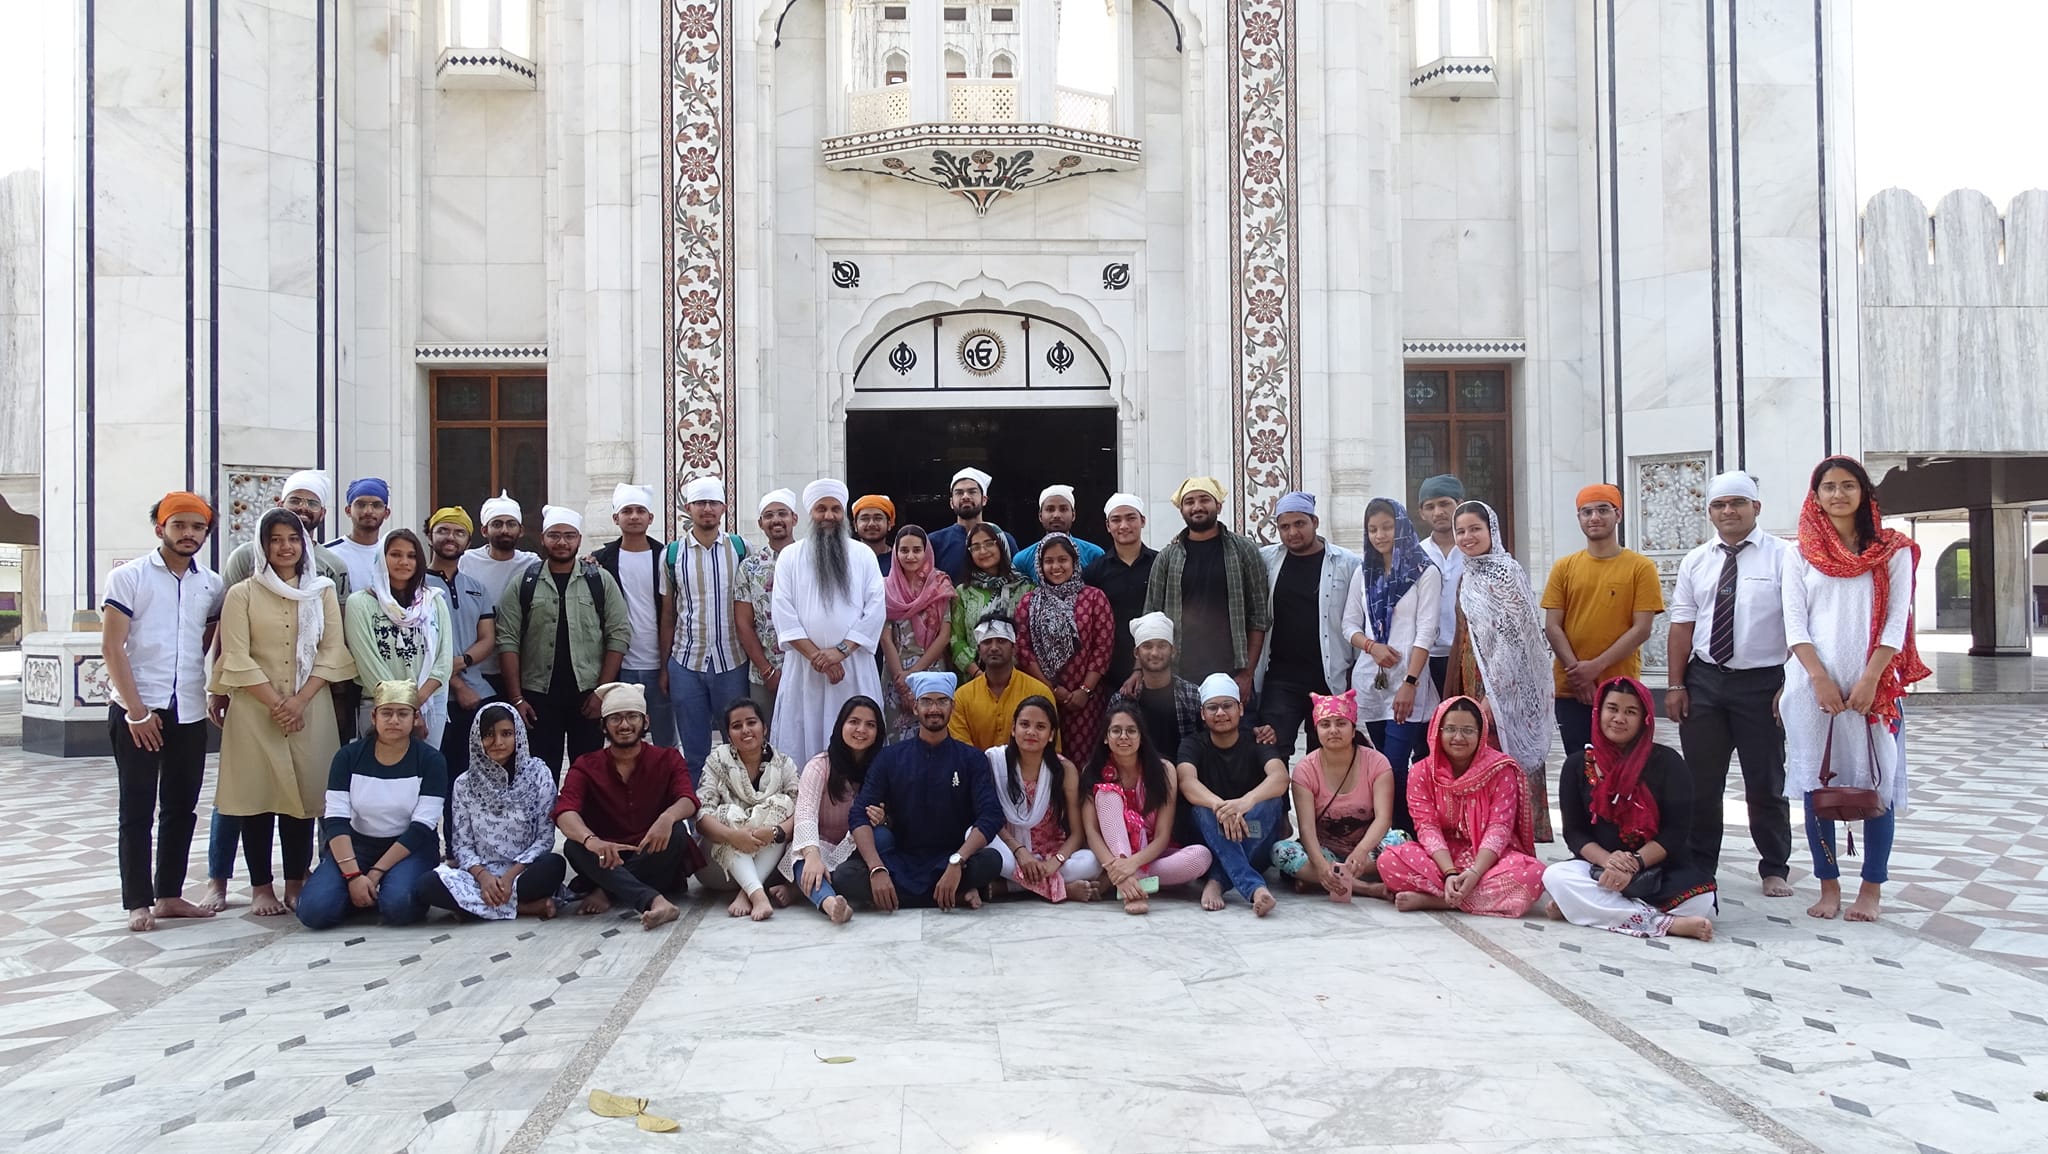 Global Peace Foundation | Ongoing Interfaith Programs Build Bridges in India